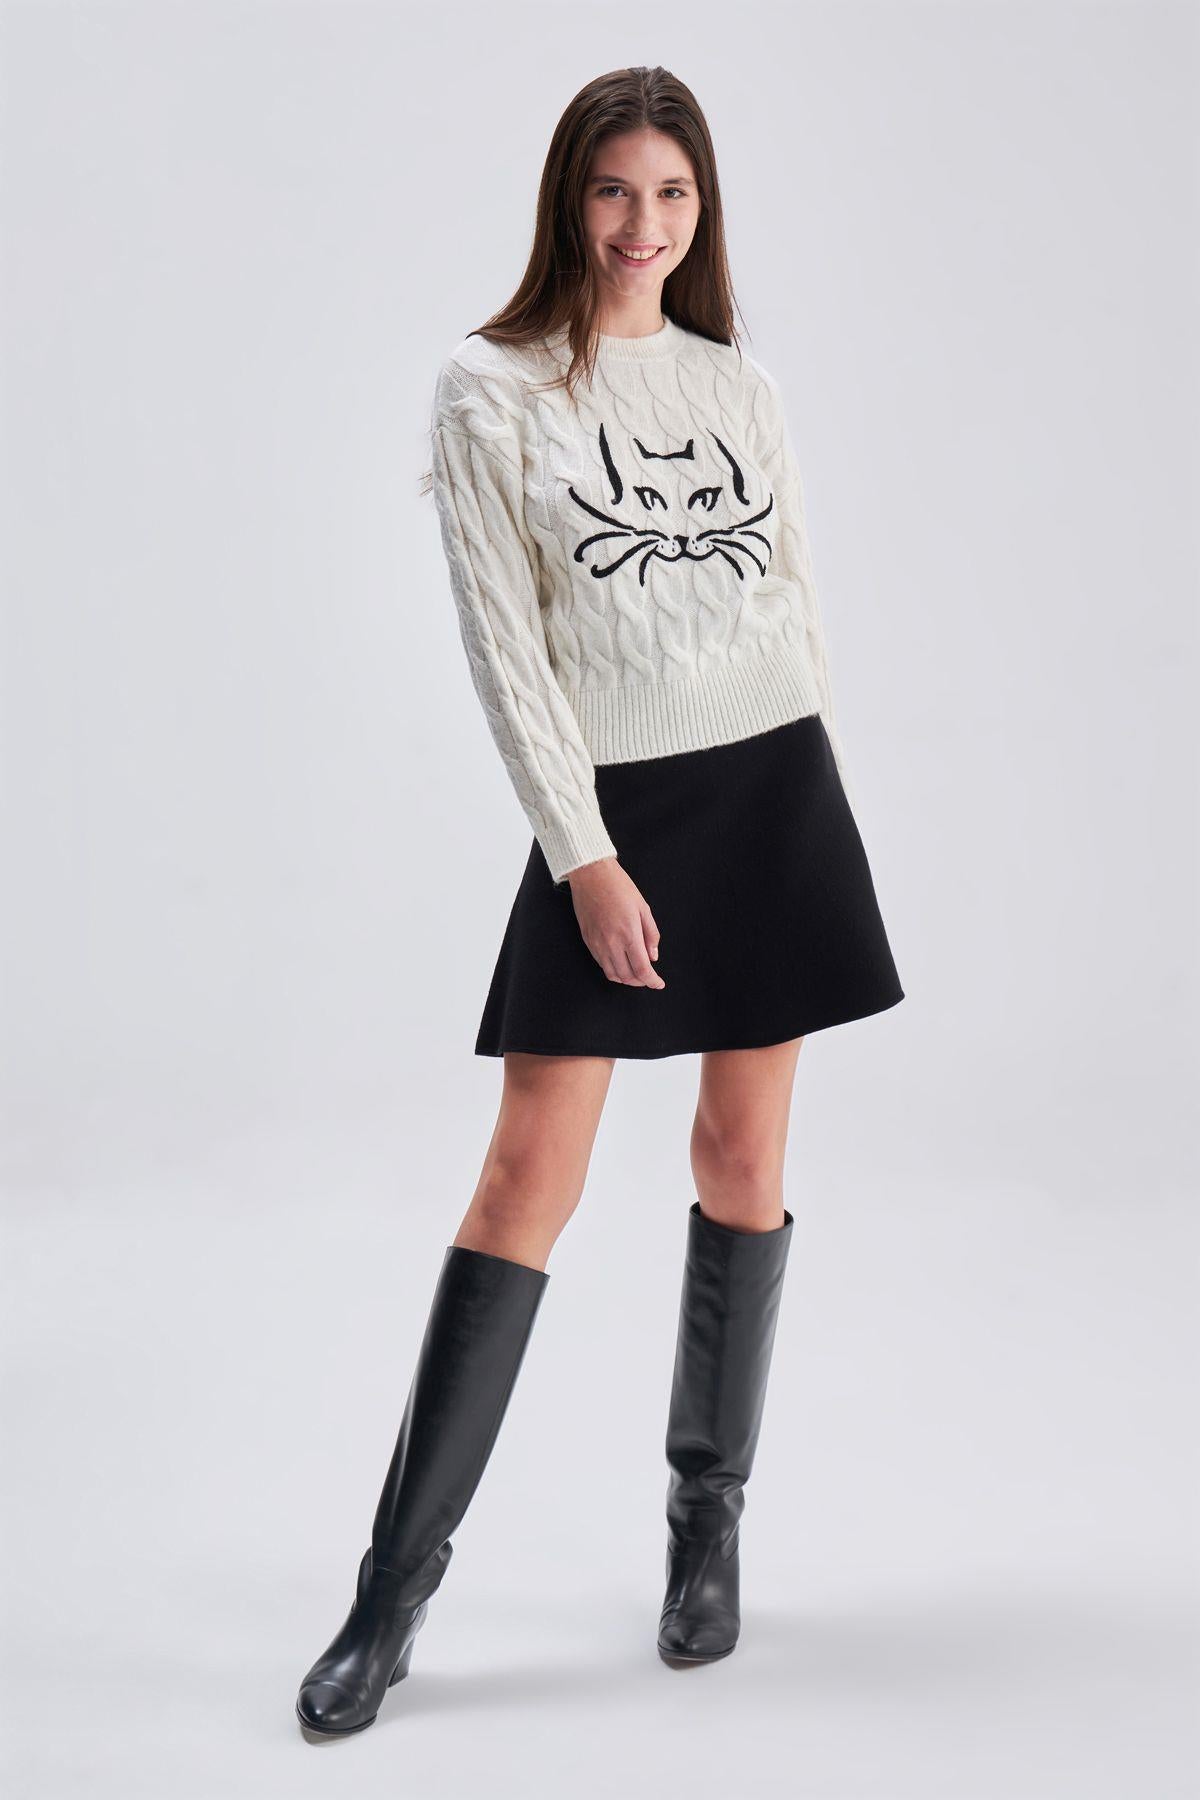 Cable Knit Cat Patterned Knitwear Sweater